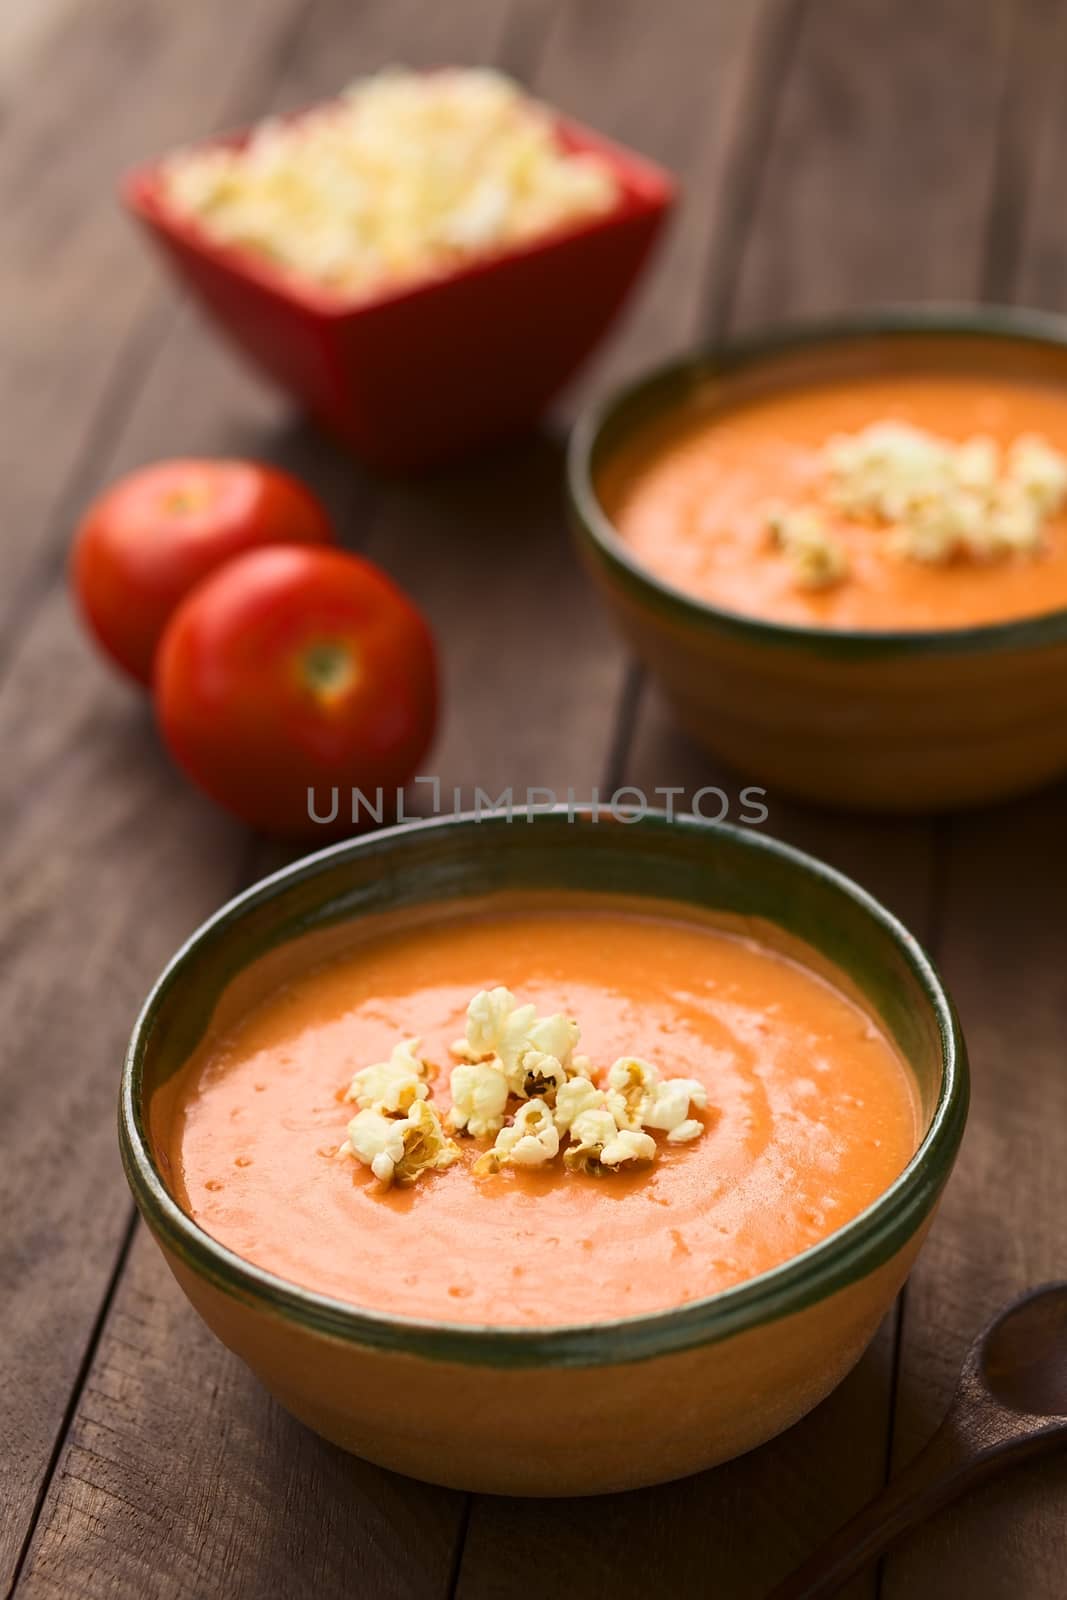 Ecuadorian tomato and potato cream soup served with popcorn on top in rustic bowls (Selective Focus, Focus on the front of the popcorn on the soup)